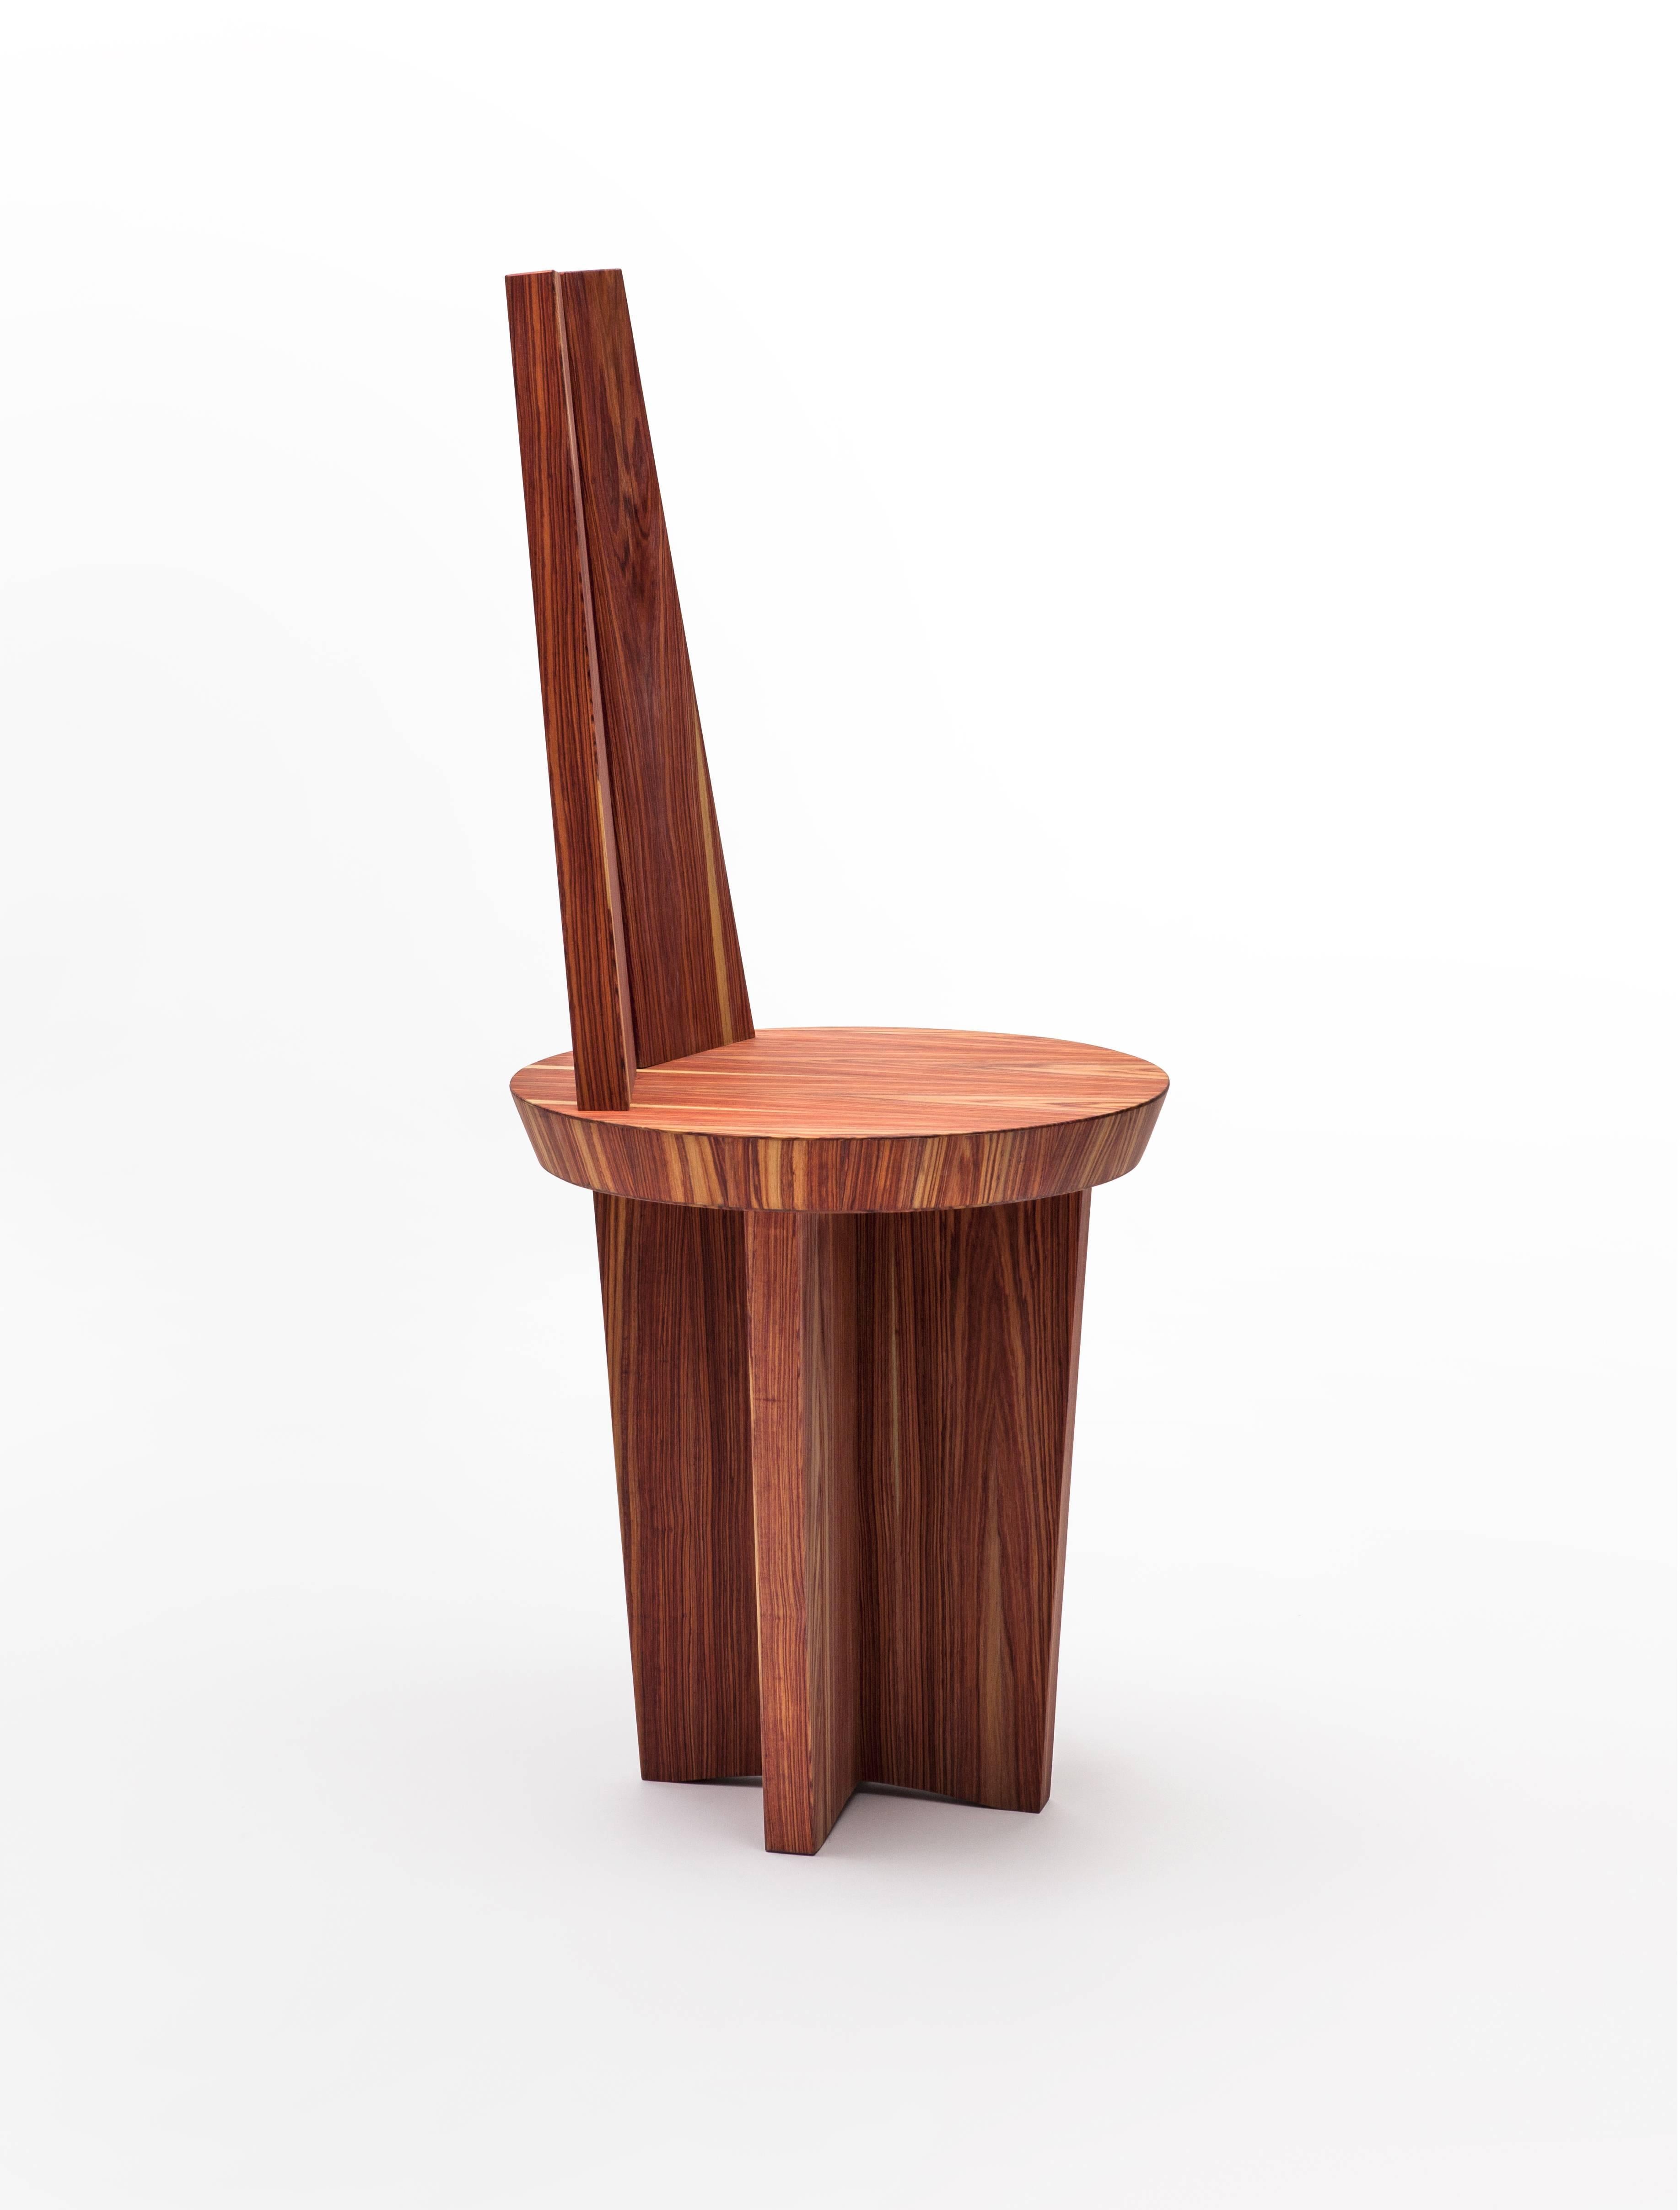 A chair that seems to have always existed, the simplicity of its shape is enriched through the use of wood with copper insertion.
Almost a small sculpture that takes us back to the past, to the roots of our lands, craftsmen culture, simple